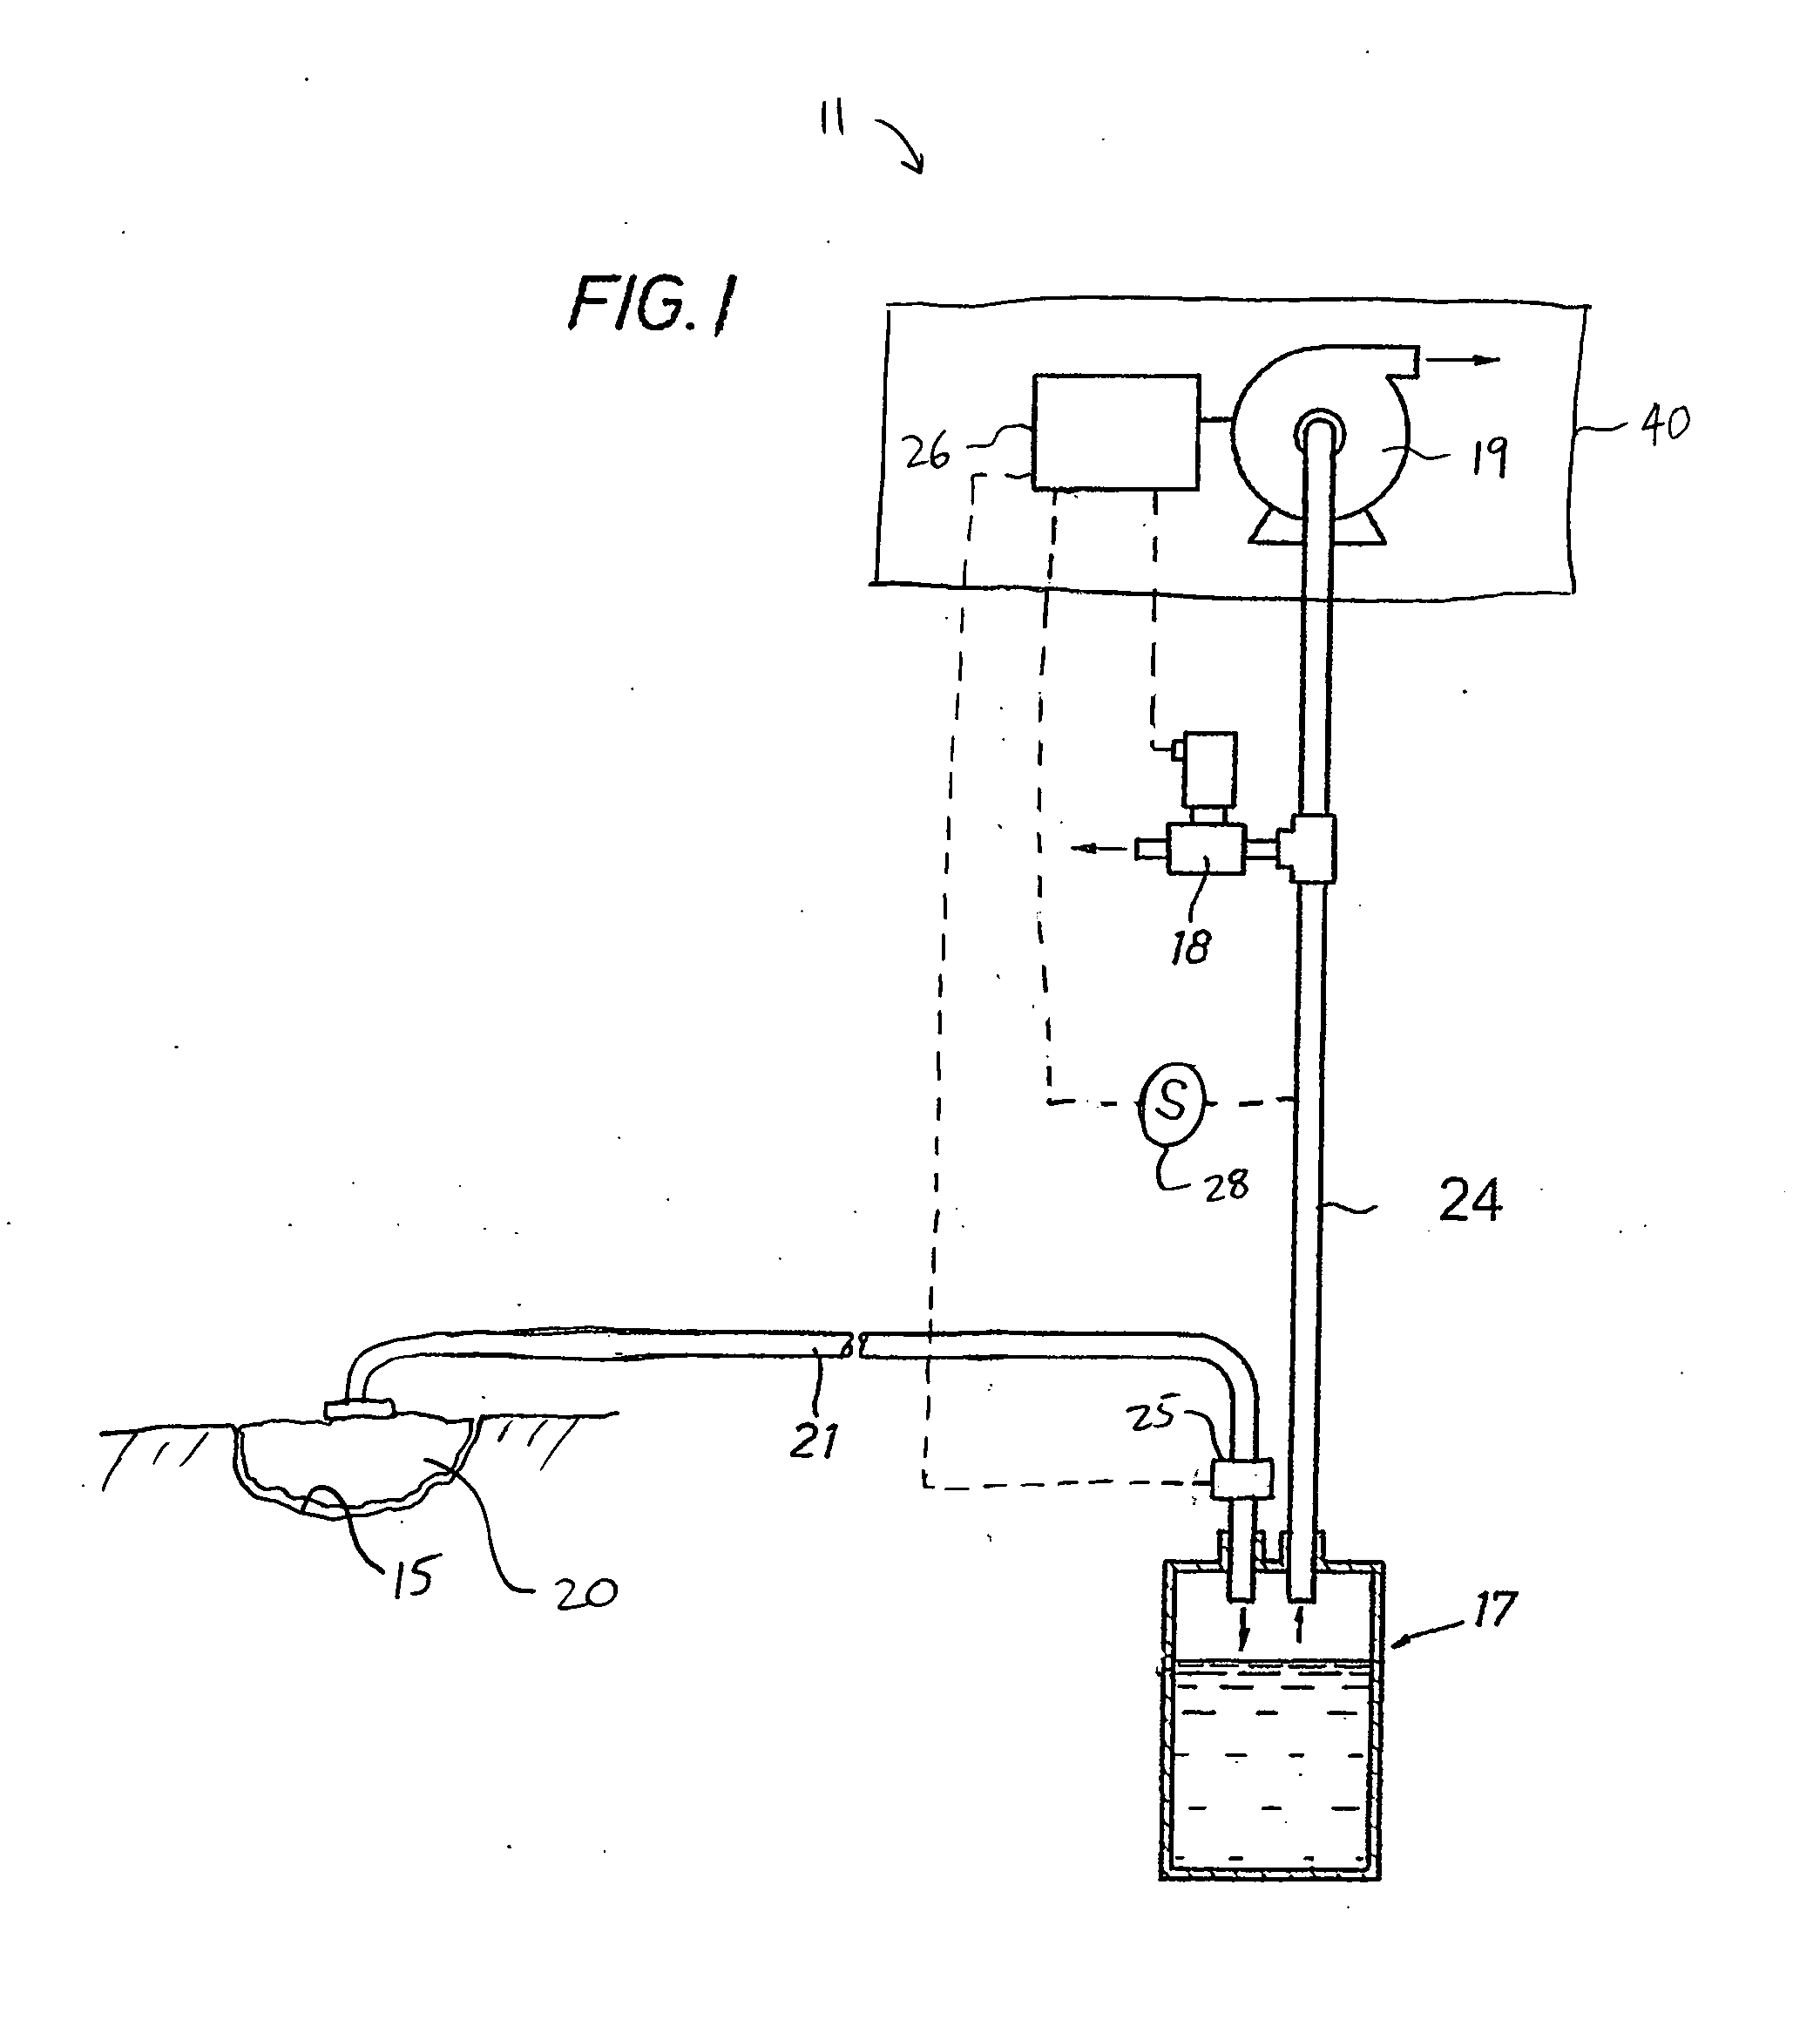 System and method for determining a fill status of a canister of fluid in a reduced pressure treatment system